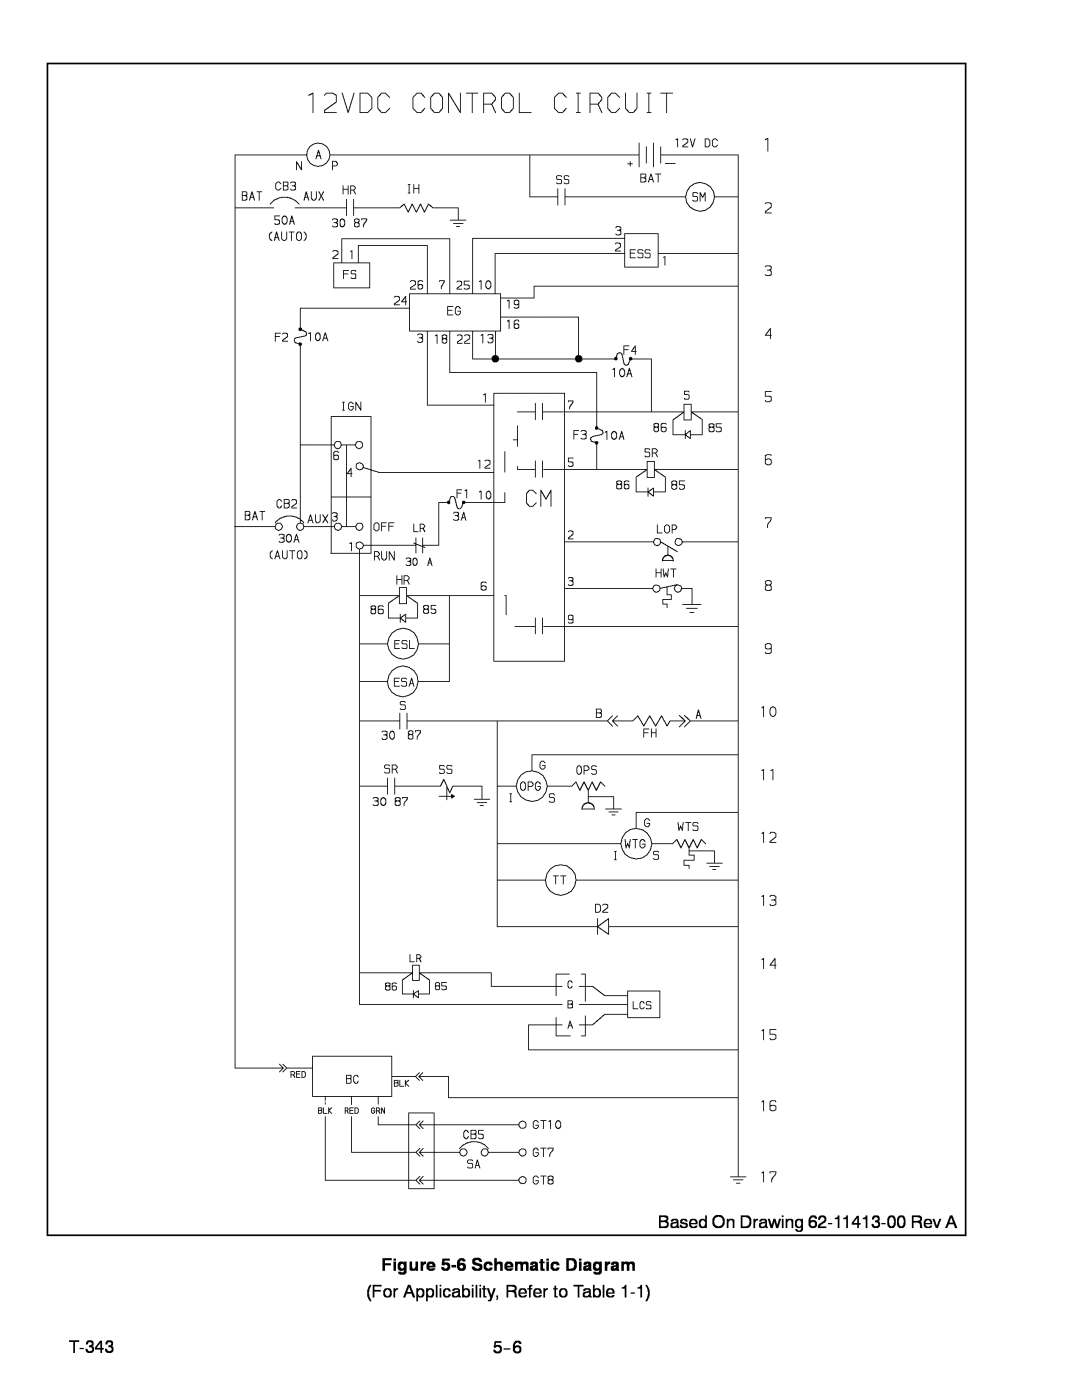 Carrier 69UG15 6 Schematic Diagram, Based On Drawing 62-11413-00 Rev A, For Applicability, Refer to Table, T-343, 5--6 